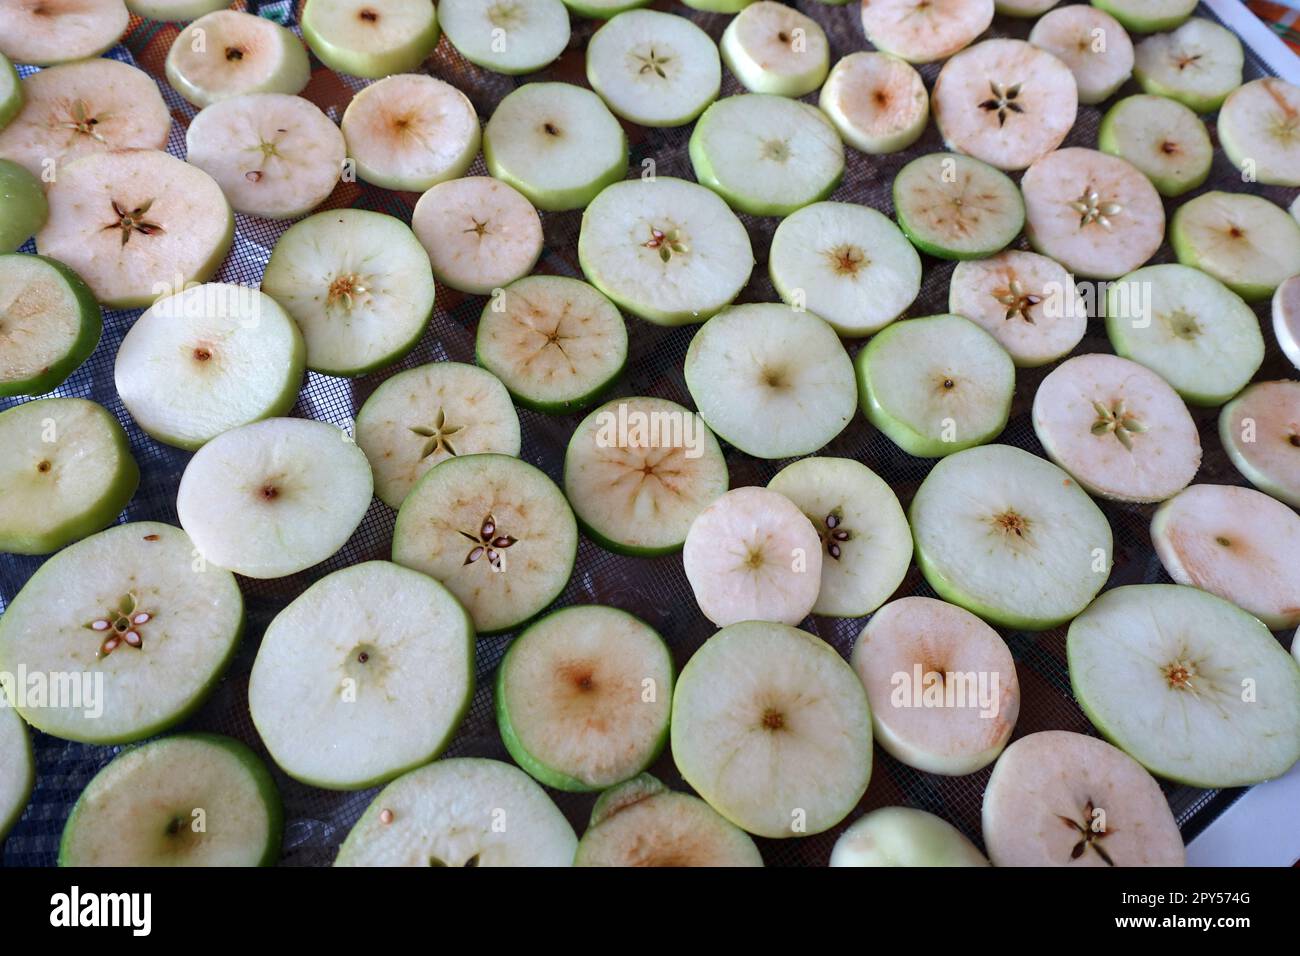 drying homemade apples, drying apples, sliced apple slices left to dry Stock Photo